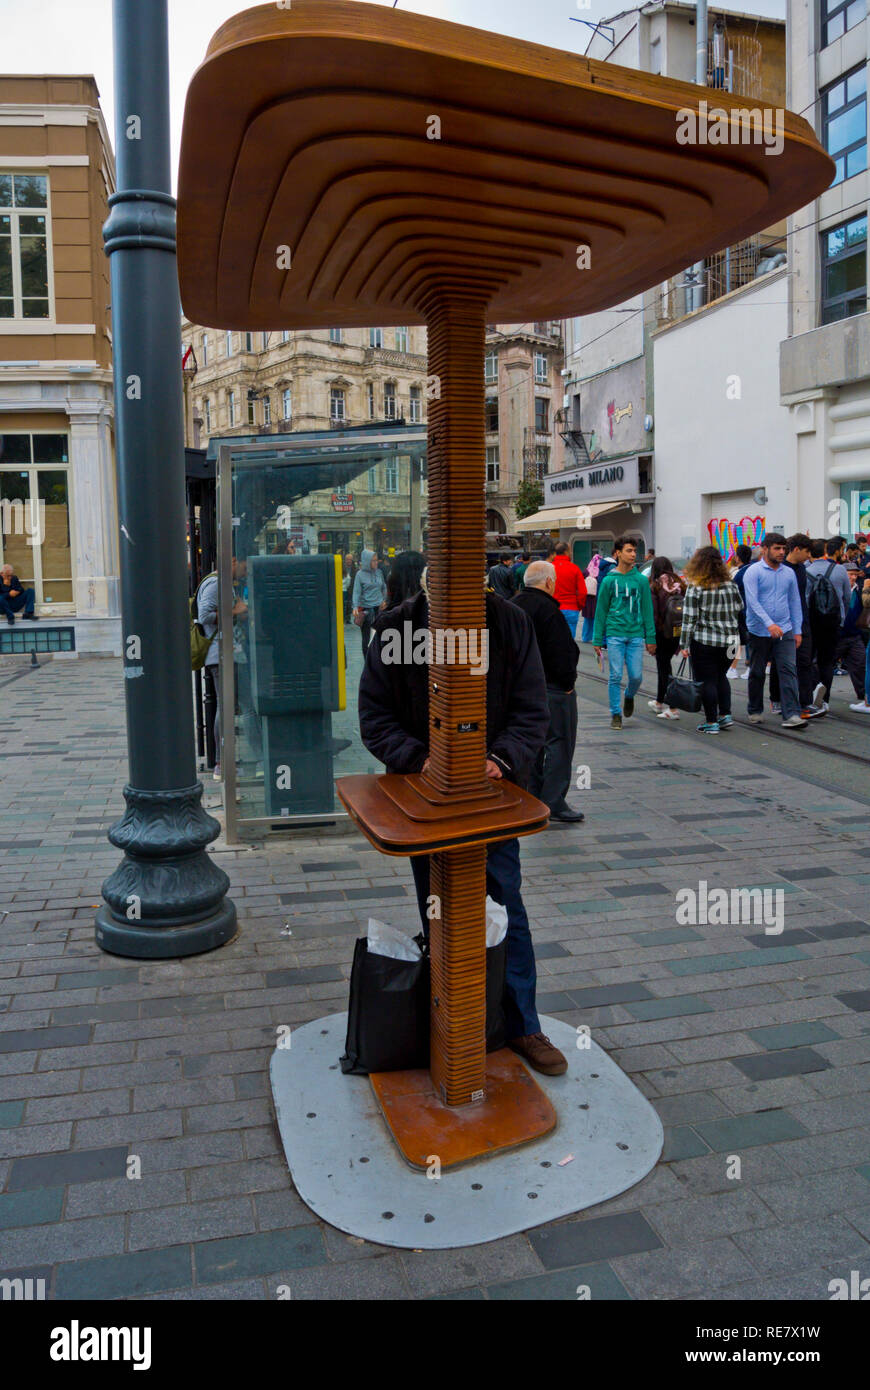 Street charging station, point for charging phones and other electronic gadgets, Istiklal Caddesi, Beyoglu, Istanbul, Turkey, Eurasia Stock Photo